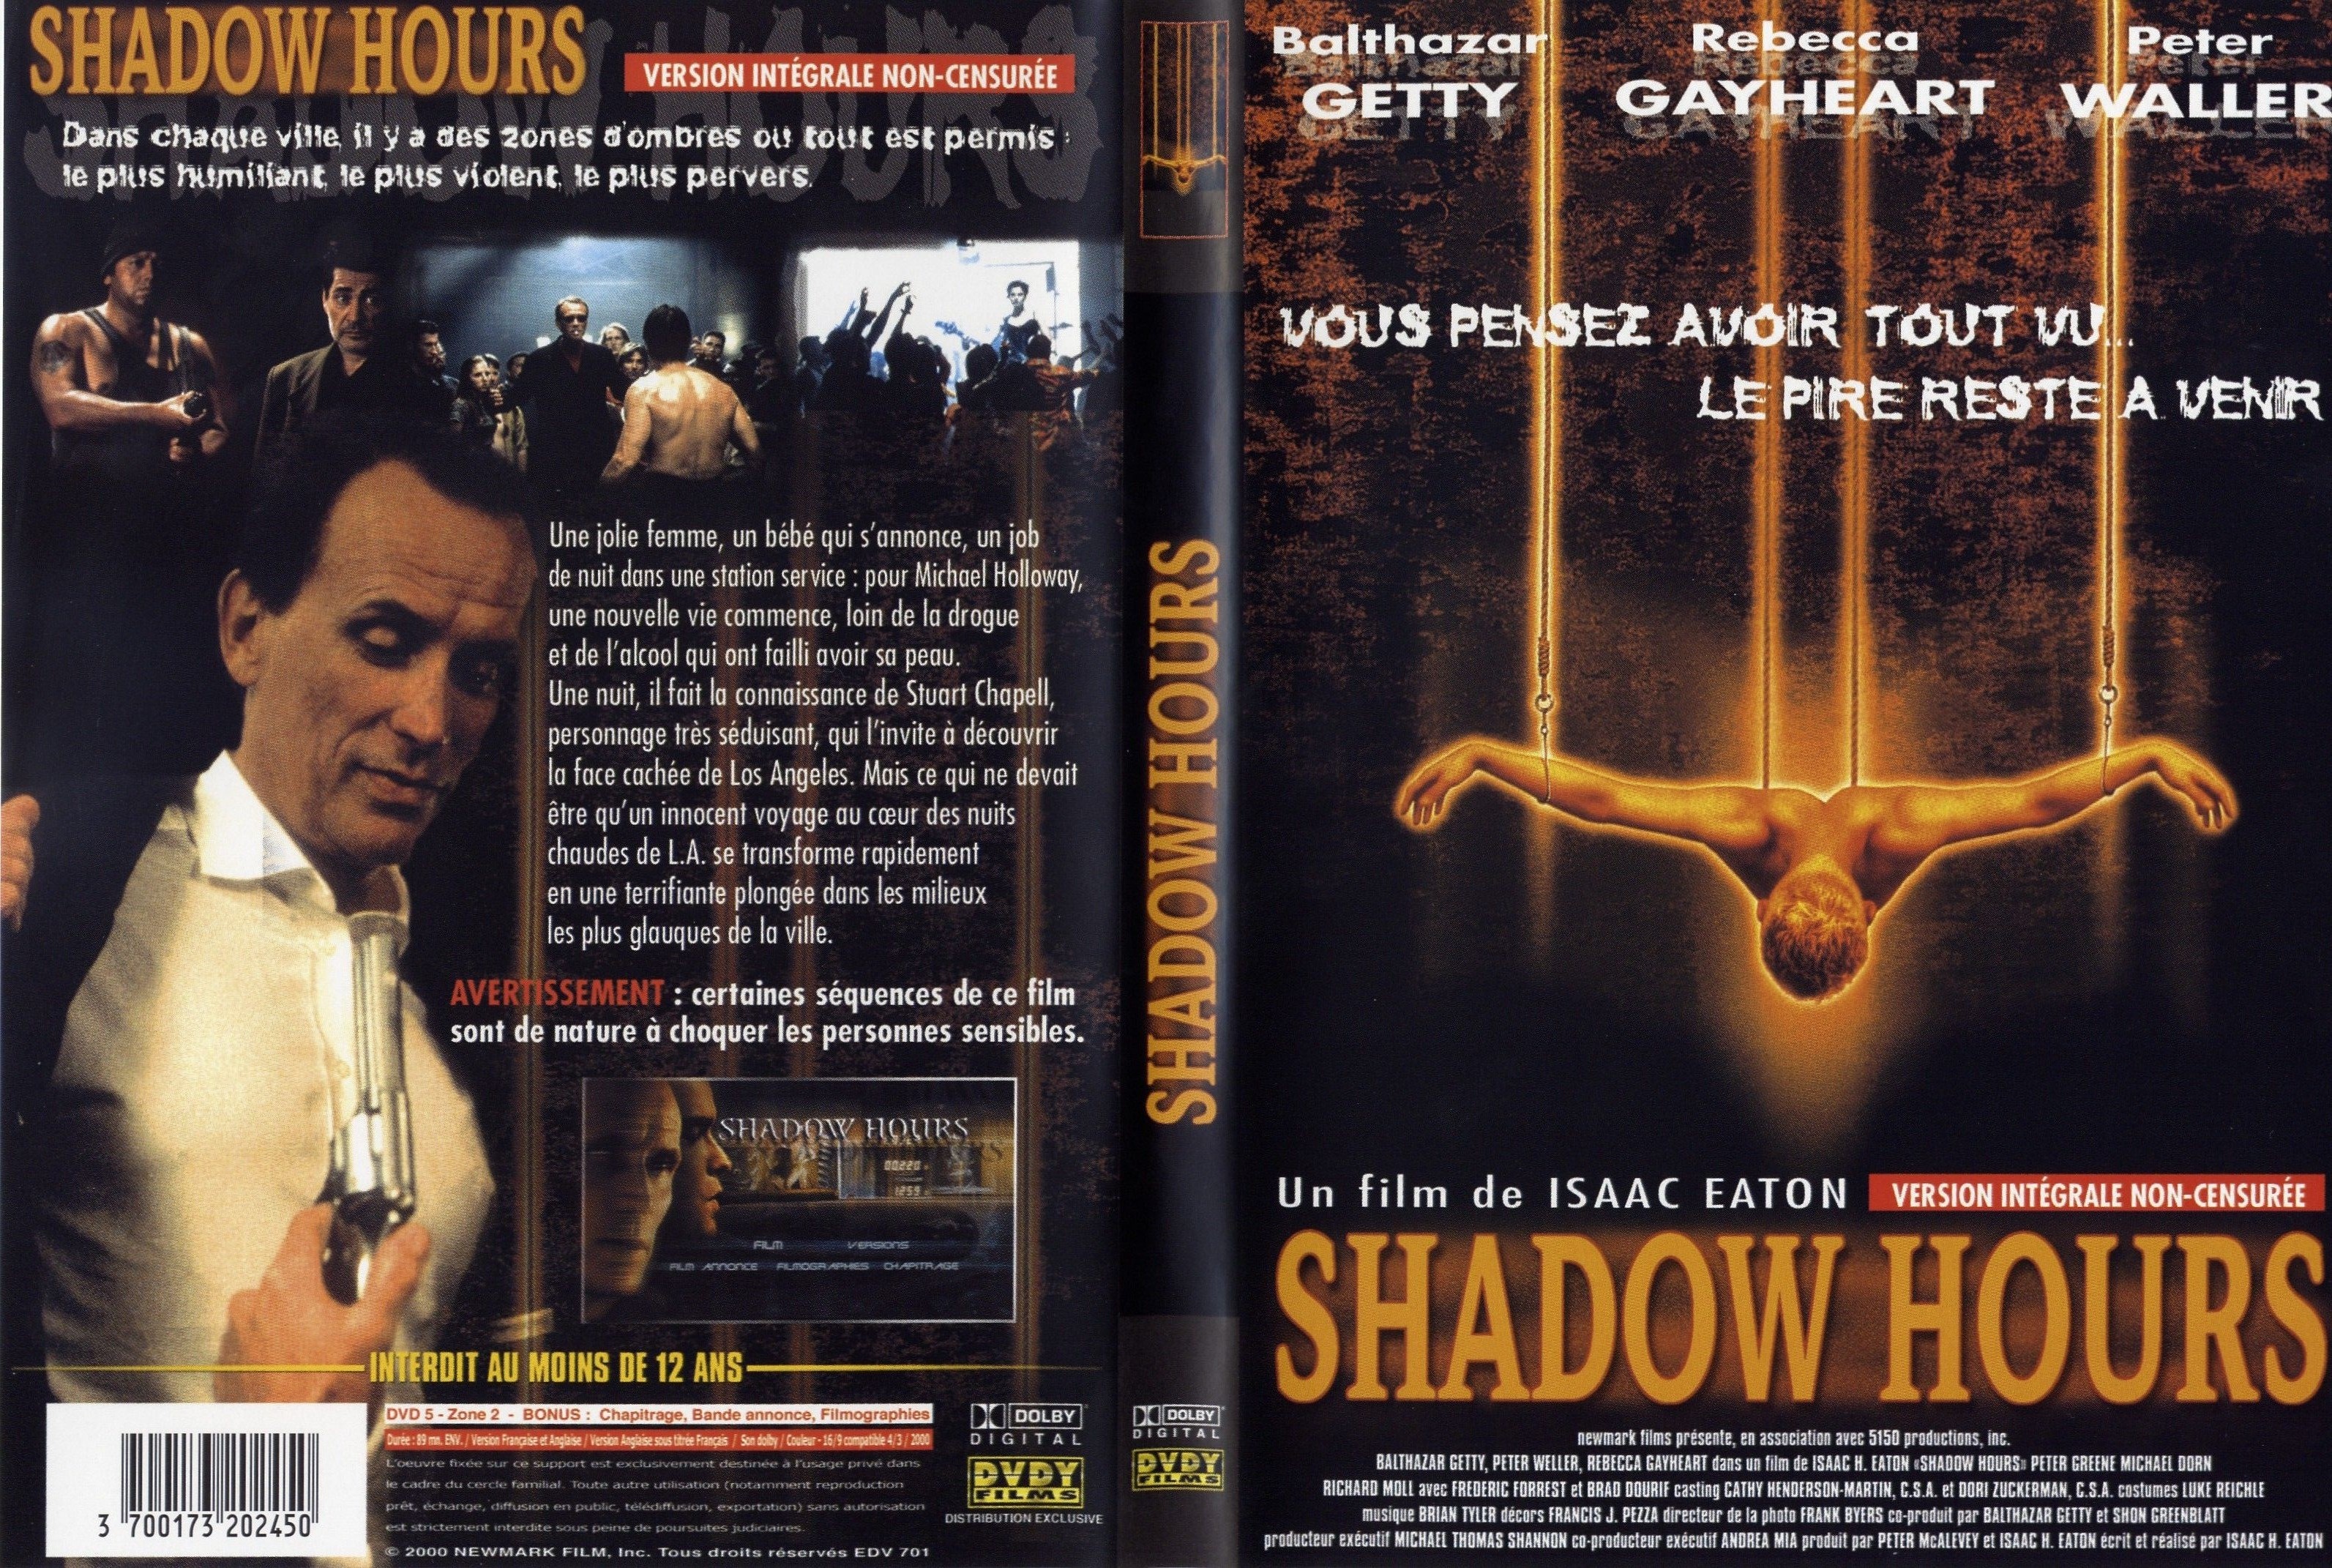 Jaquette DVD Shadow hours